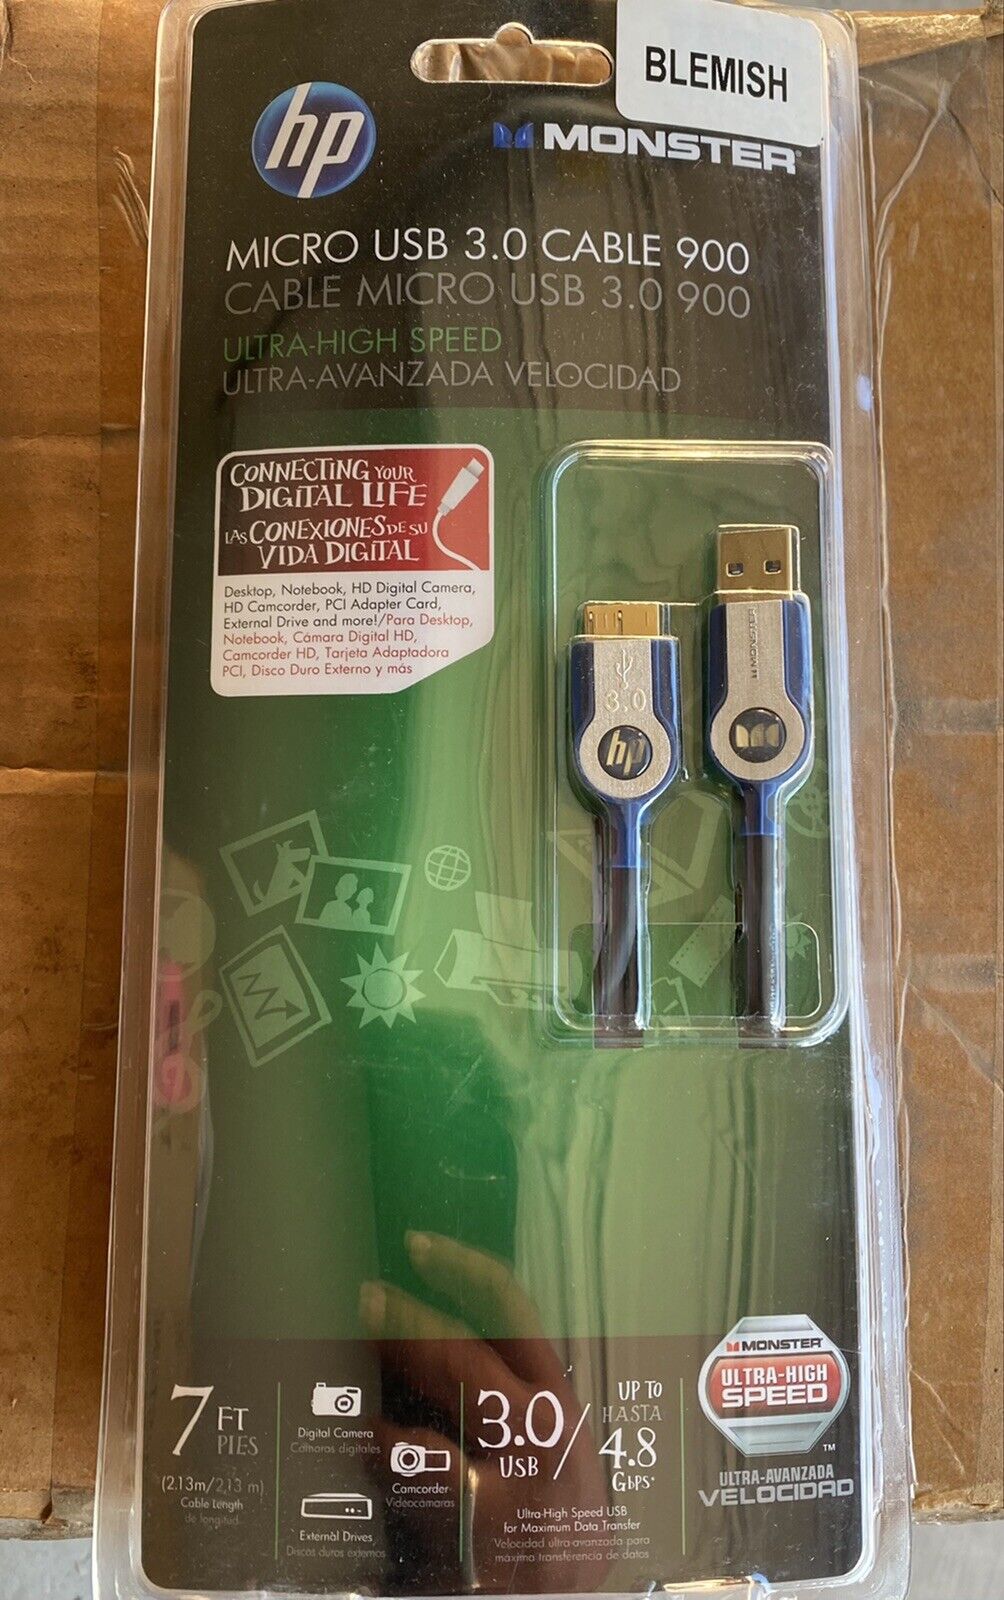 HP Monster Micro USB 3.0 Cable 900 New